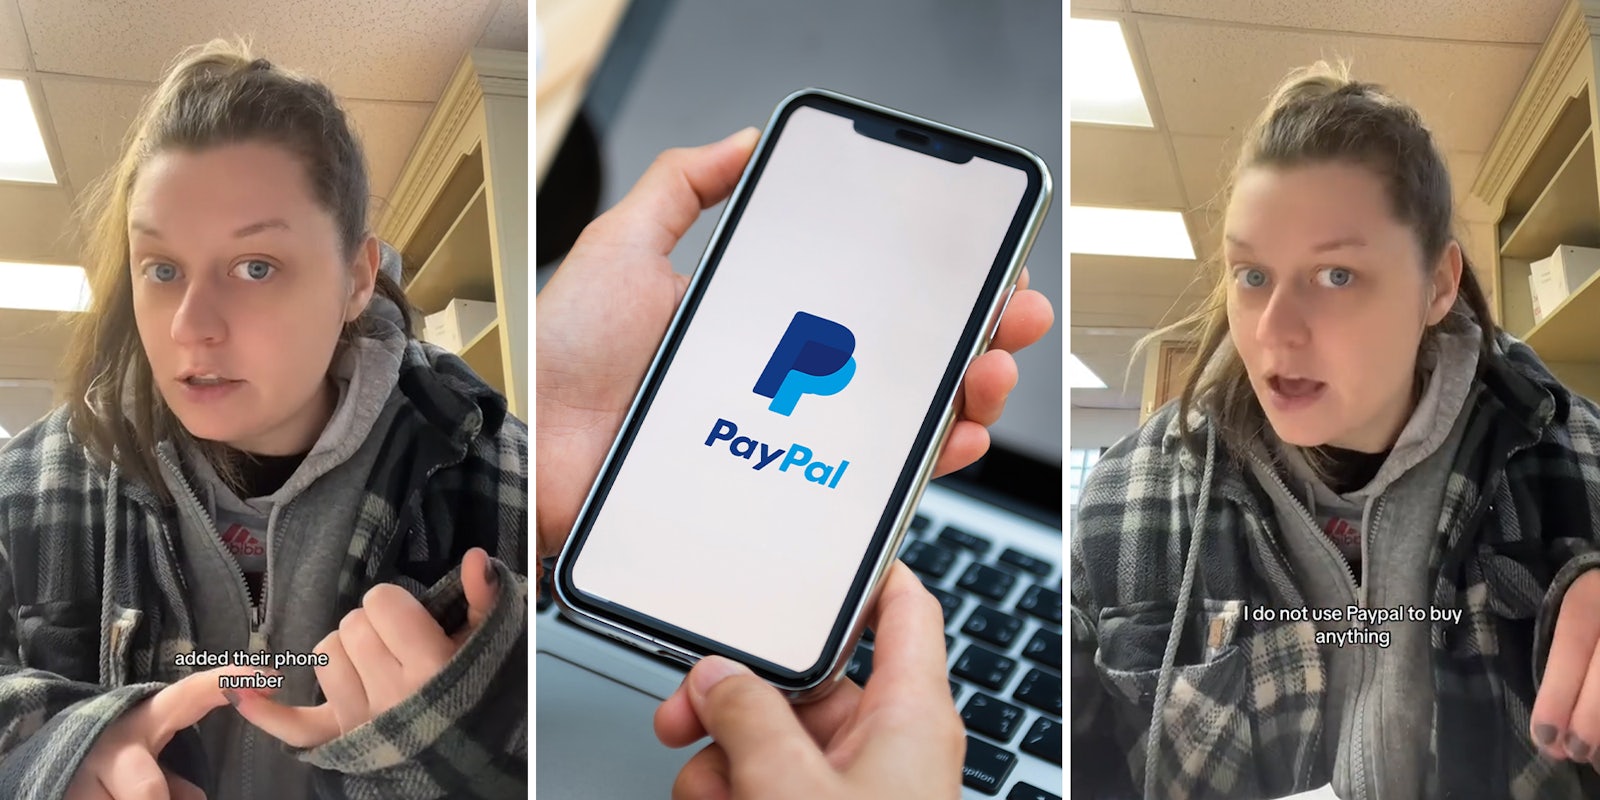 PayPal customer issues warning after over $500 went missing from her account